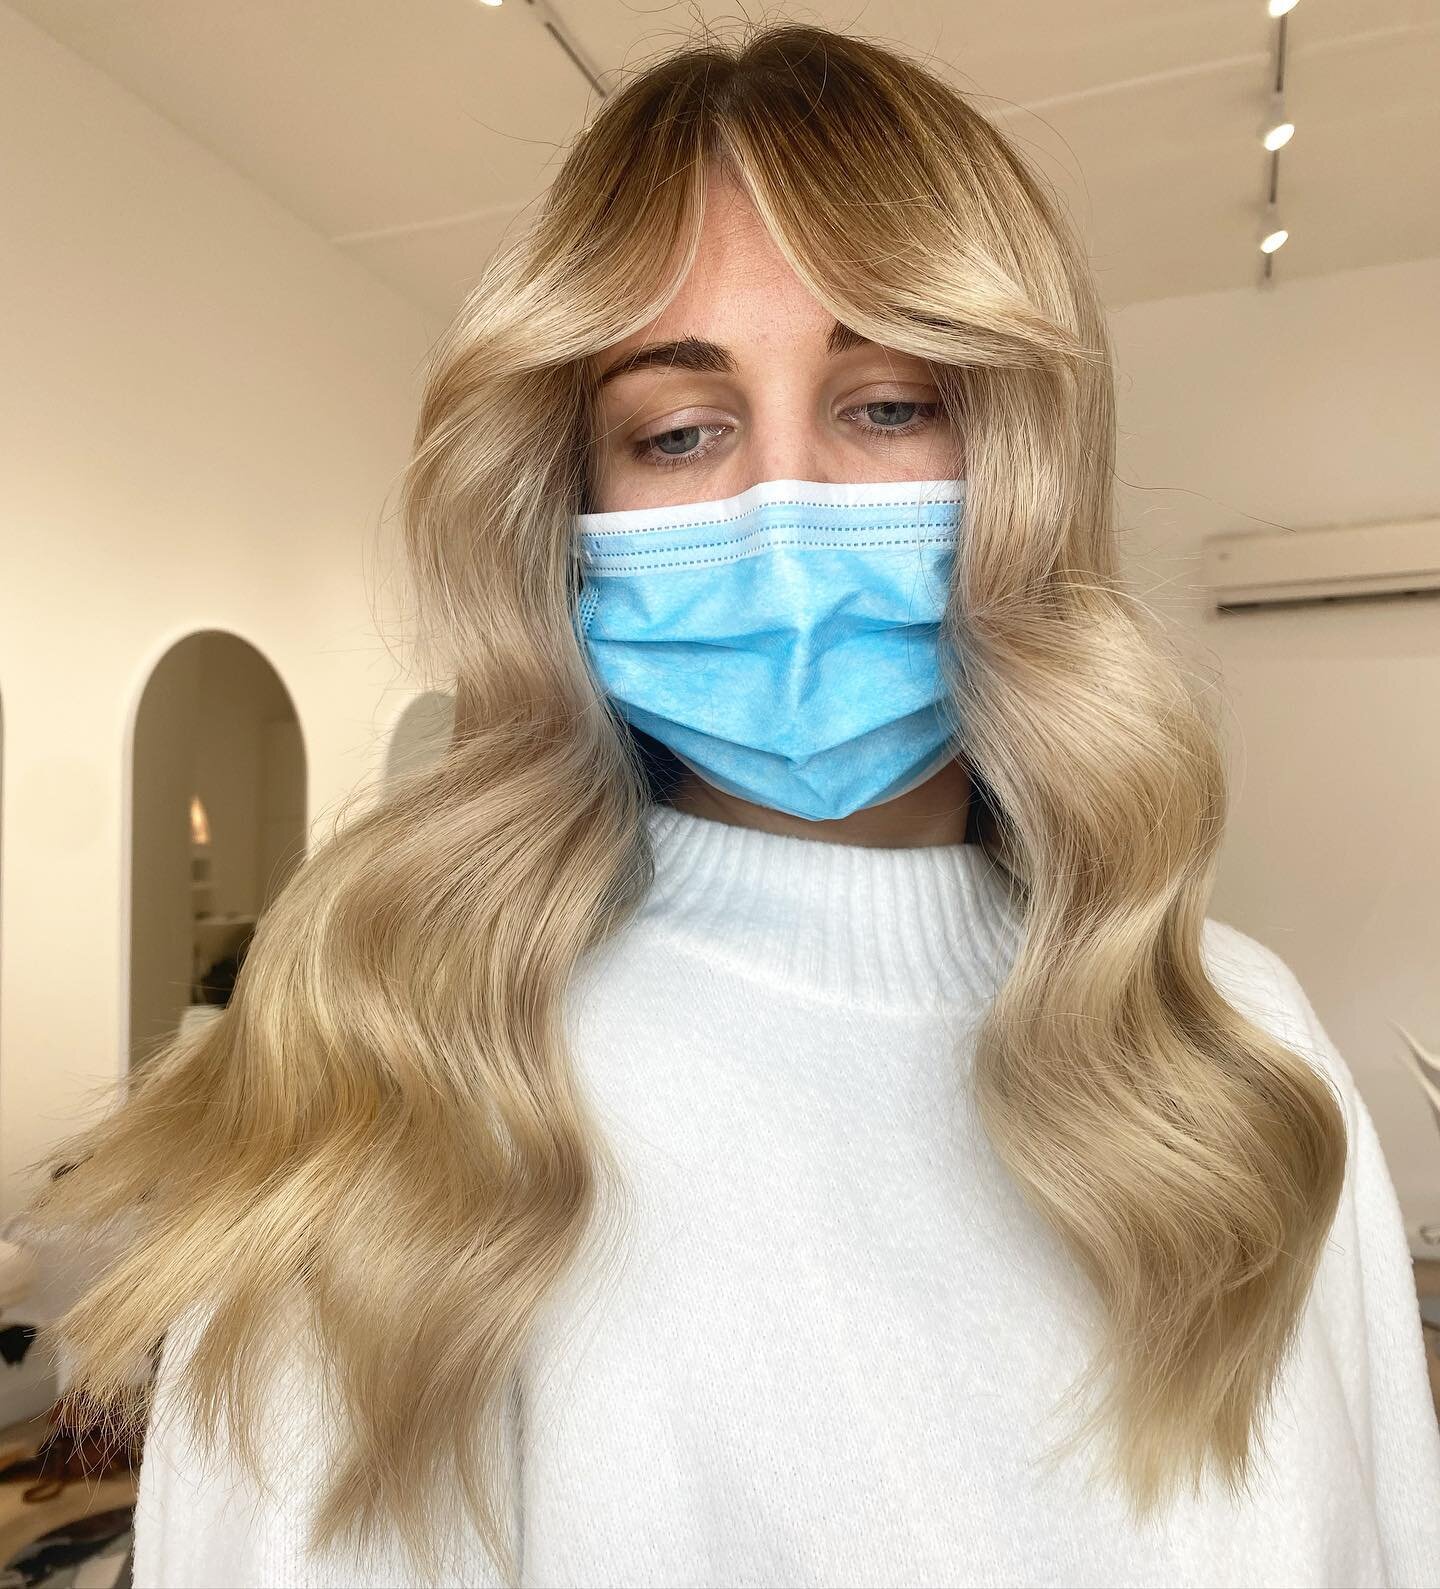 Reverse balayage 👼🏼

Kate has been a full head of foils for as long as I&rsquo;ve known her, but today we decided to soften her roots and take her to a beautiful lived in / low maintenance balayage. We opted for a subtle but bright face frame so sh